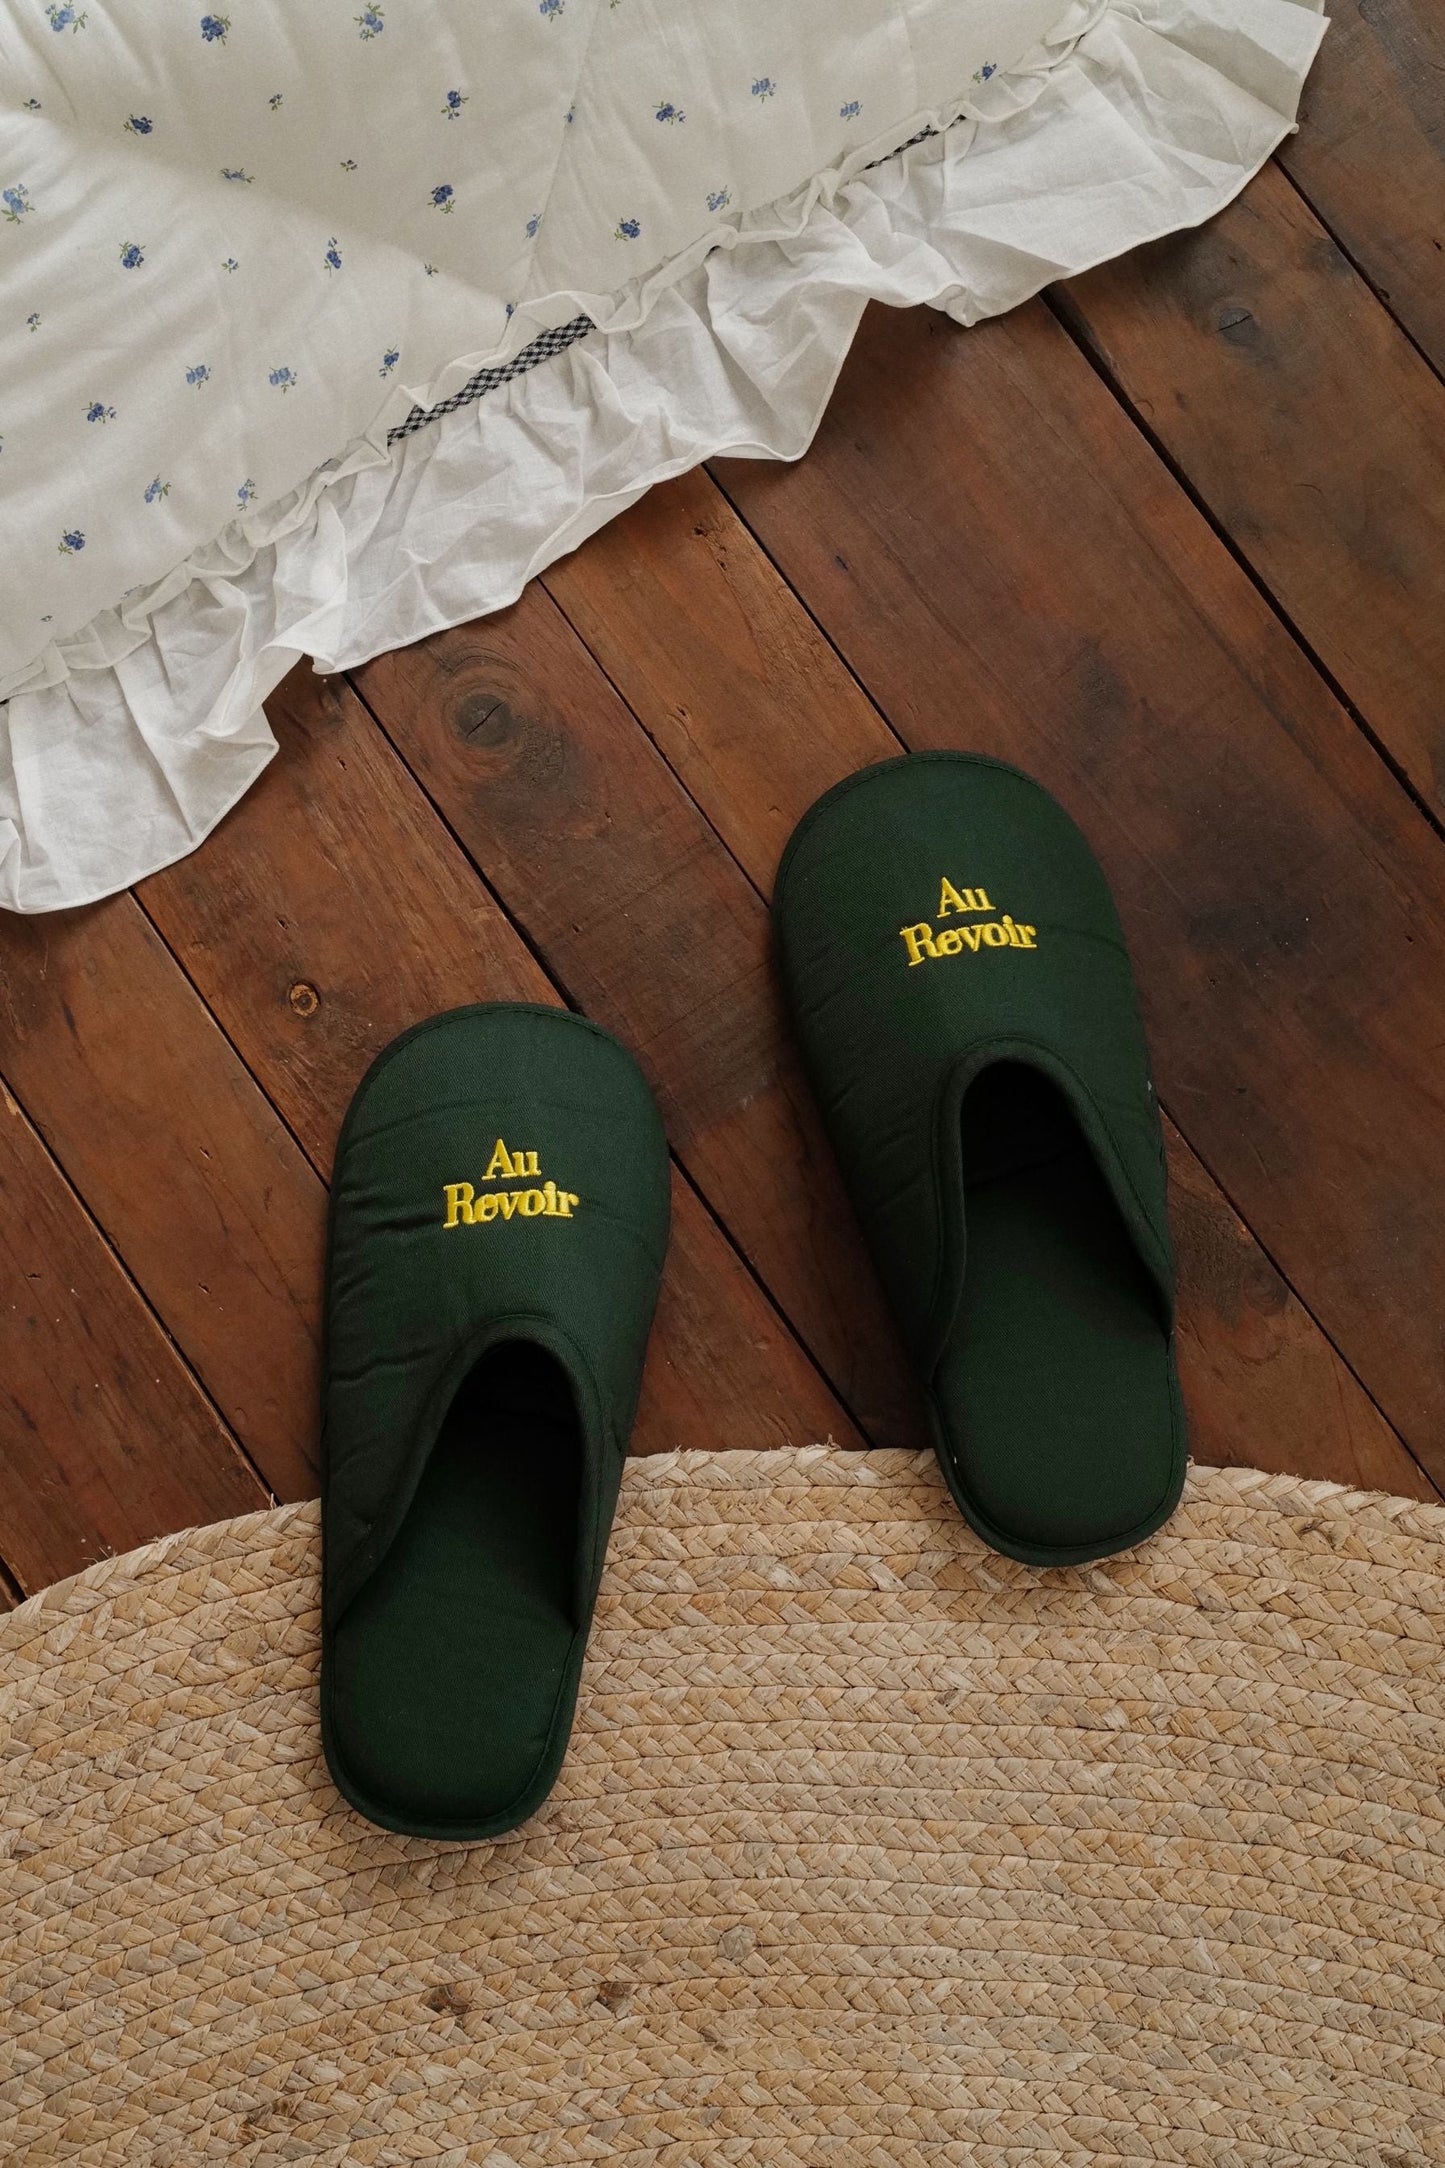 Au Revoir Embroidered Slippers